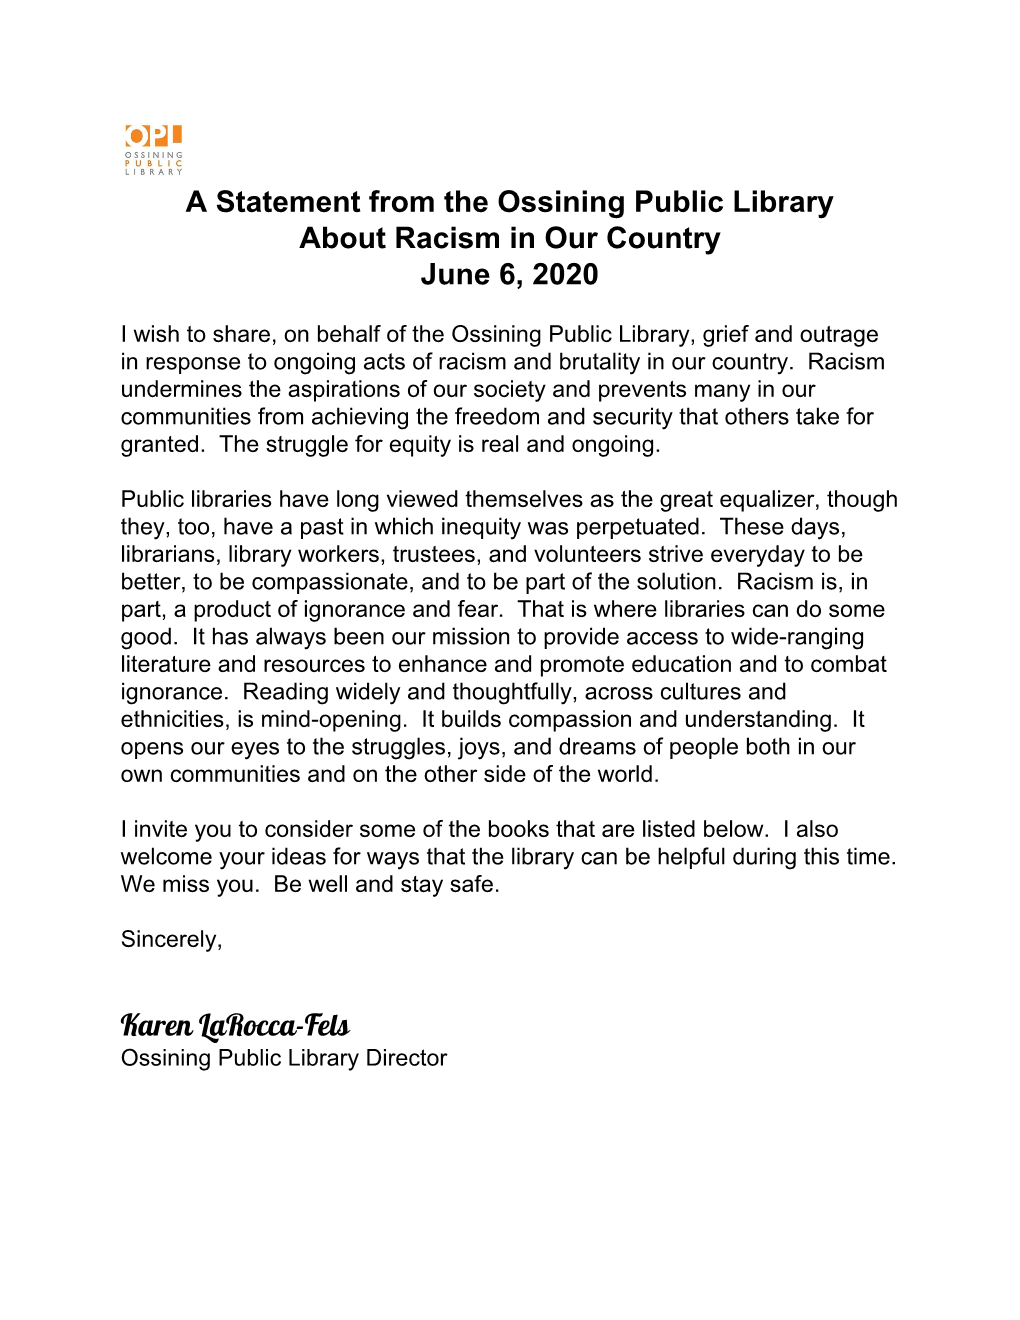 A Statement from the Ossining Public Library About Racism in Our Country June 6, 2020